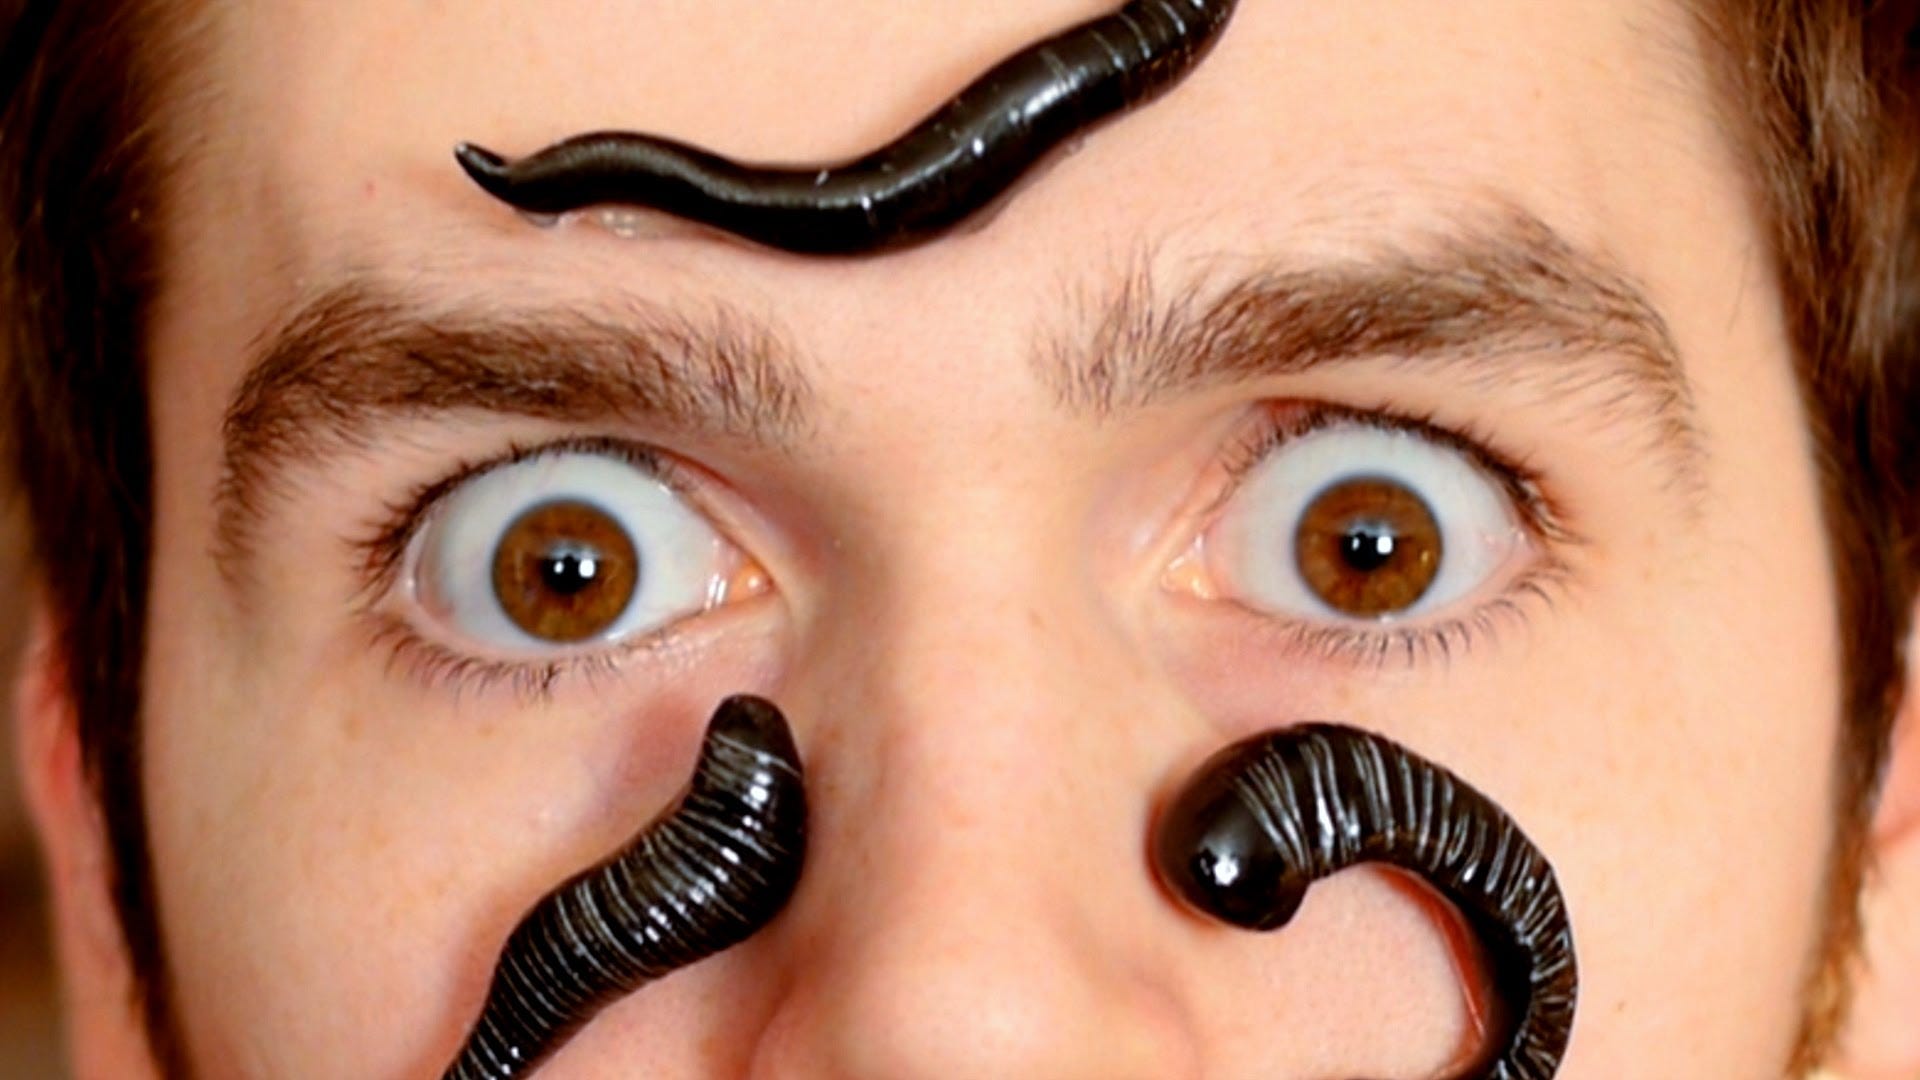 Watch: The science of leeches. Medicinal leeches were all the rage